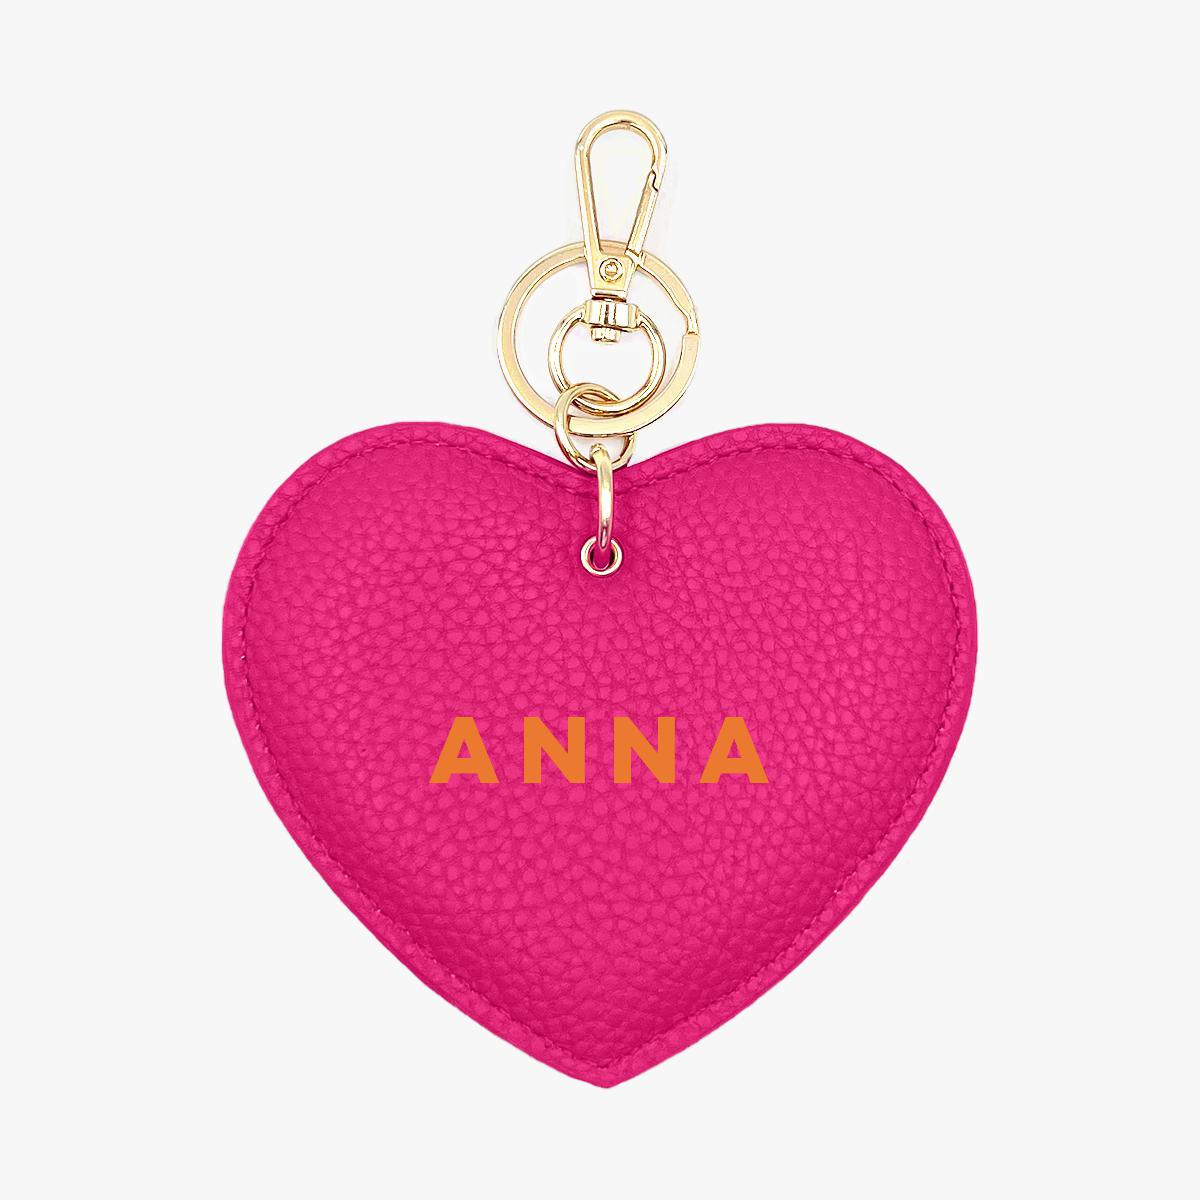 Thin Name Personalised Leather Heart Keyring